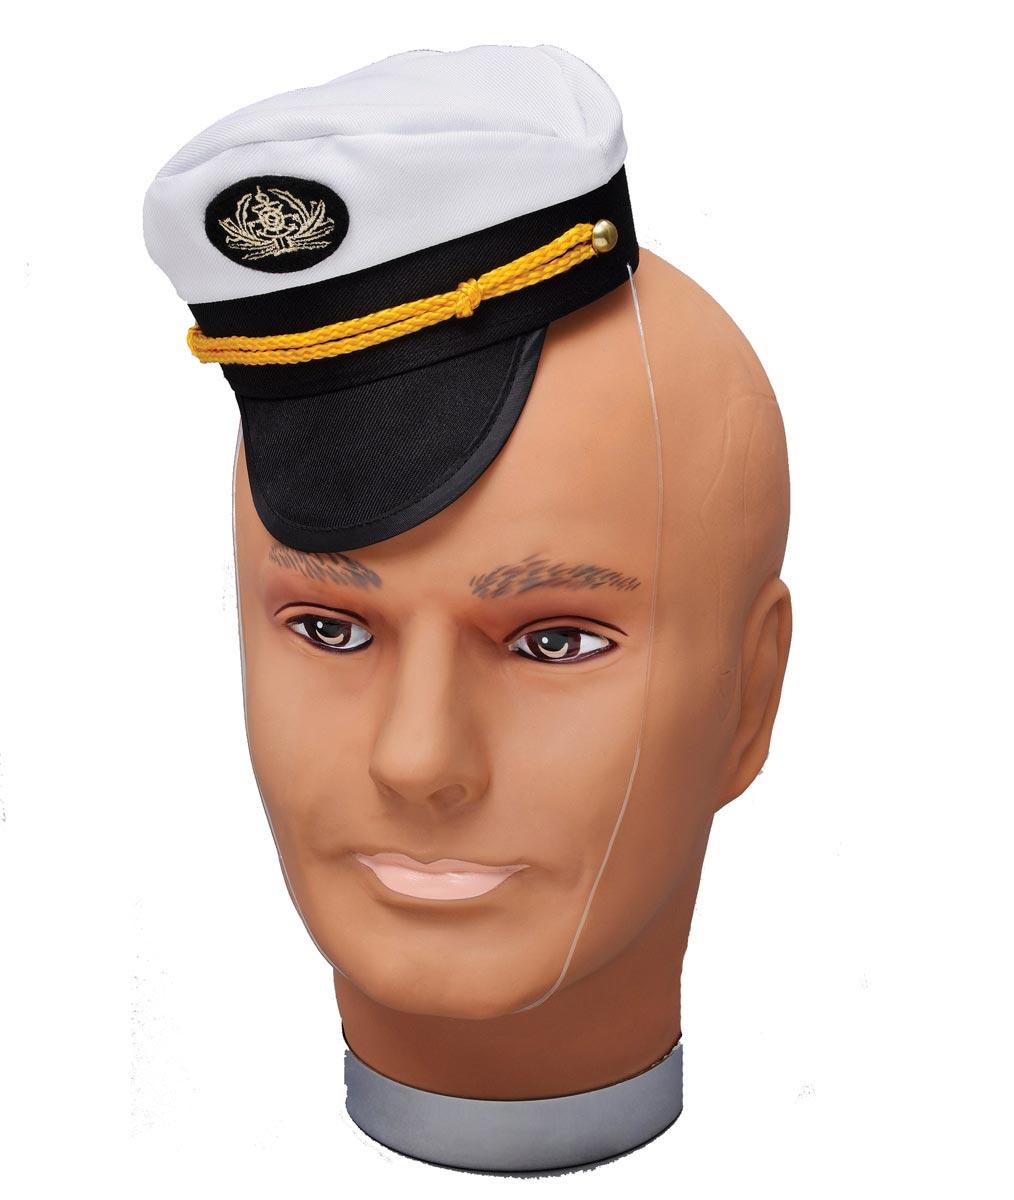 Ship's Captain Mini Cap or  Naval Officer Uniform Mini Hat by Bristol Novelties BH563 and available here at Karnival Costumes online party shop